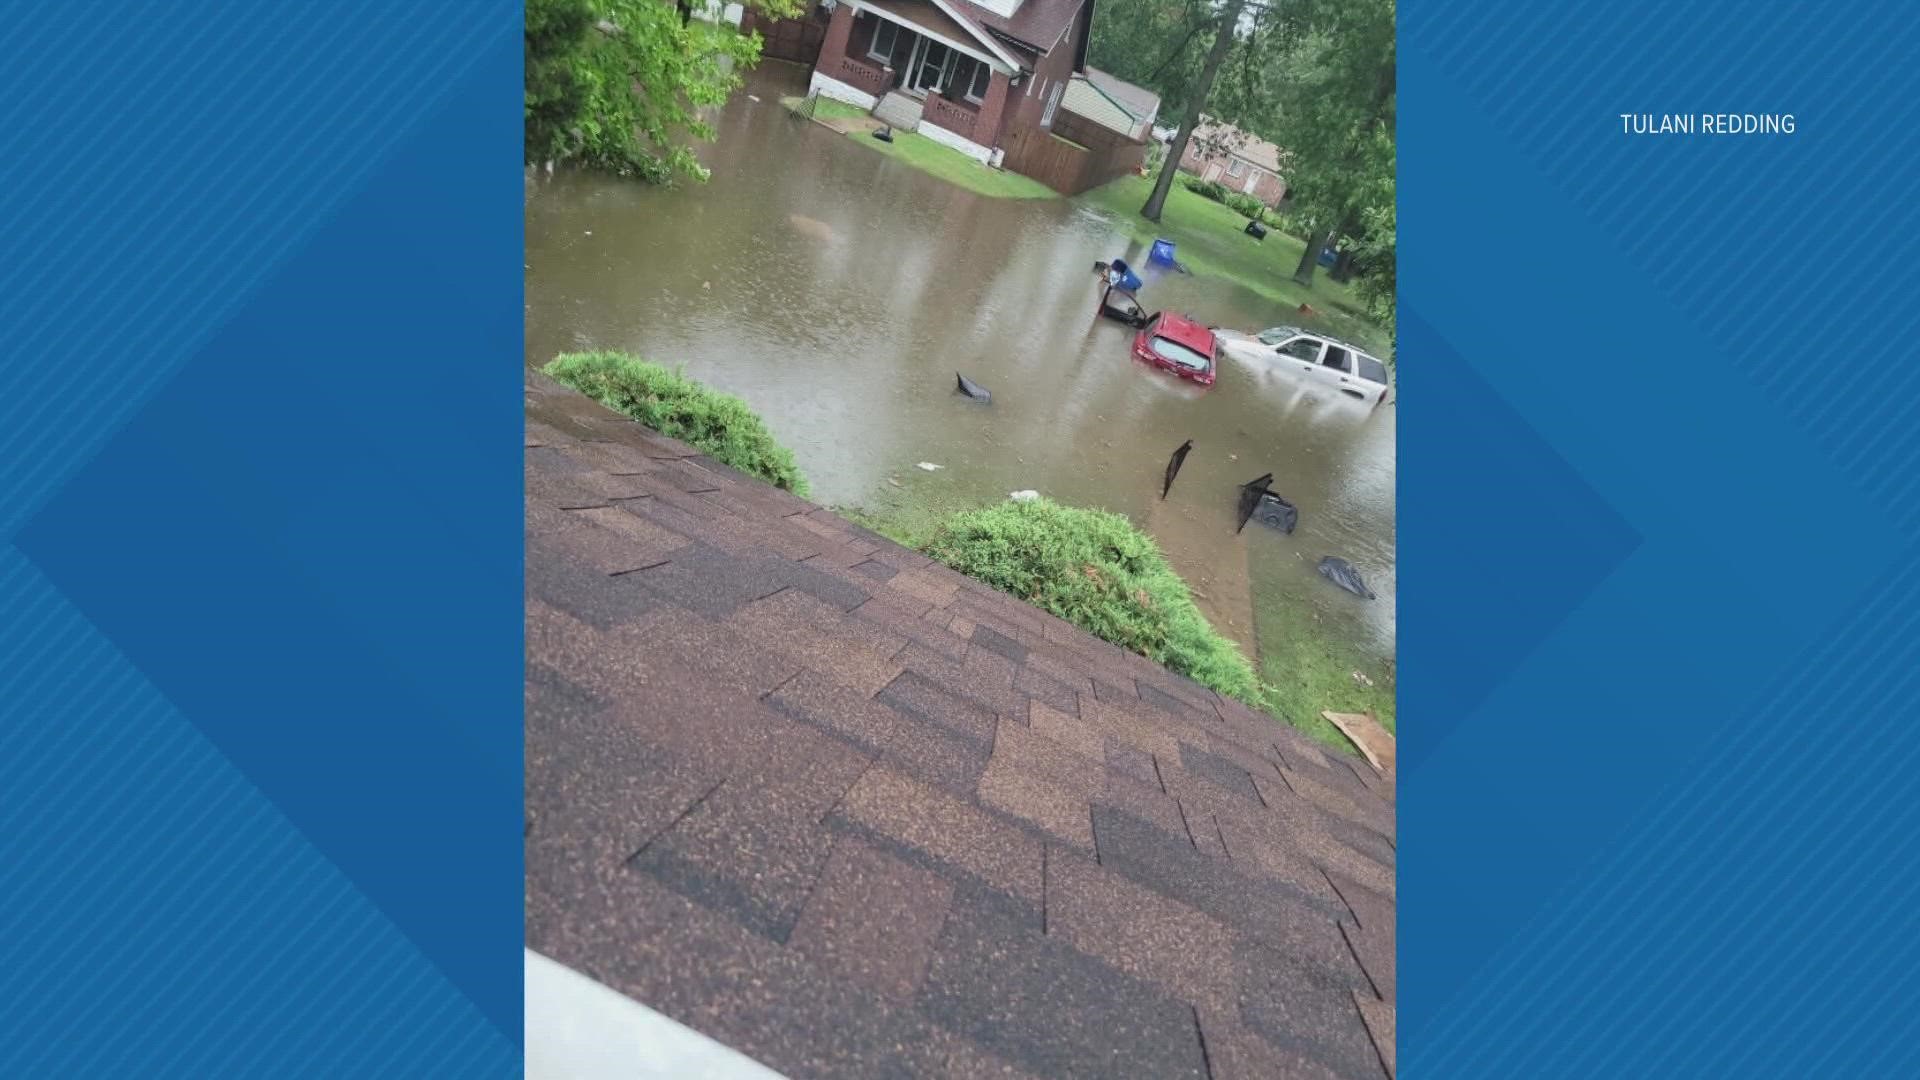 FEMA has helped more than 6,700 Missourians and approved more than $22.6 million in grants, since responding to the historic rainfall and flooding.